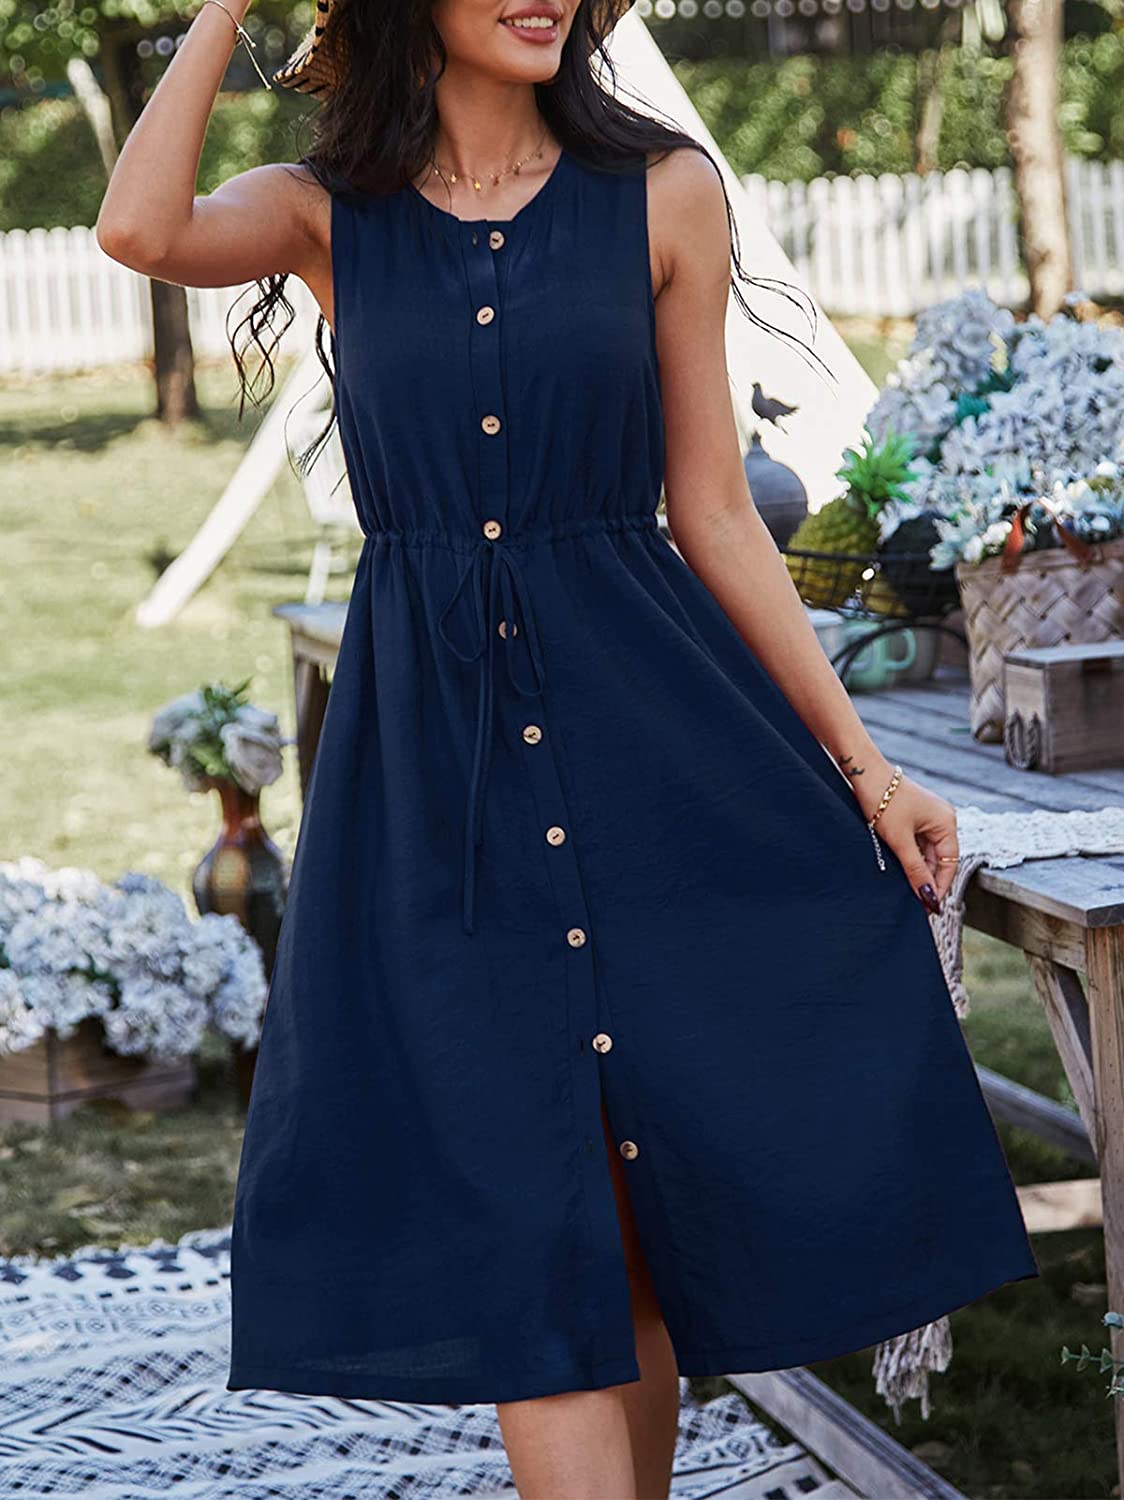 Women Casual Summer Dress Sleeveless Button Down Swing Midi Dresses with Drawstring